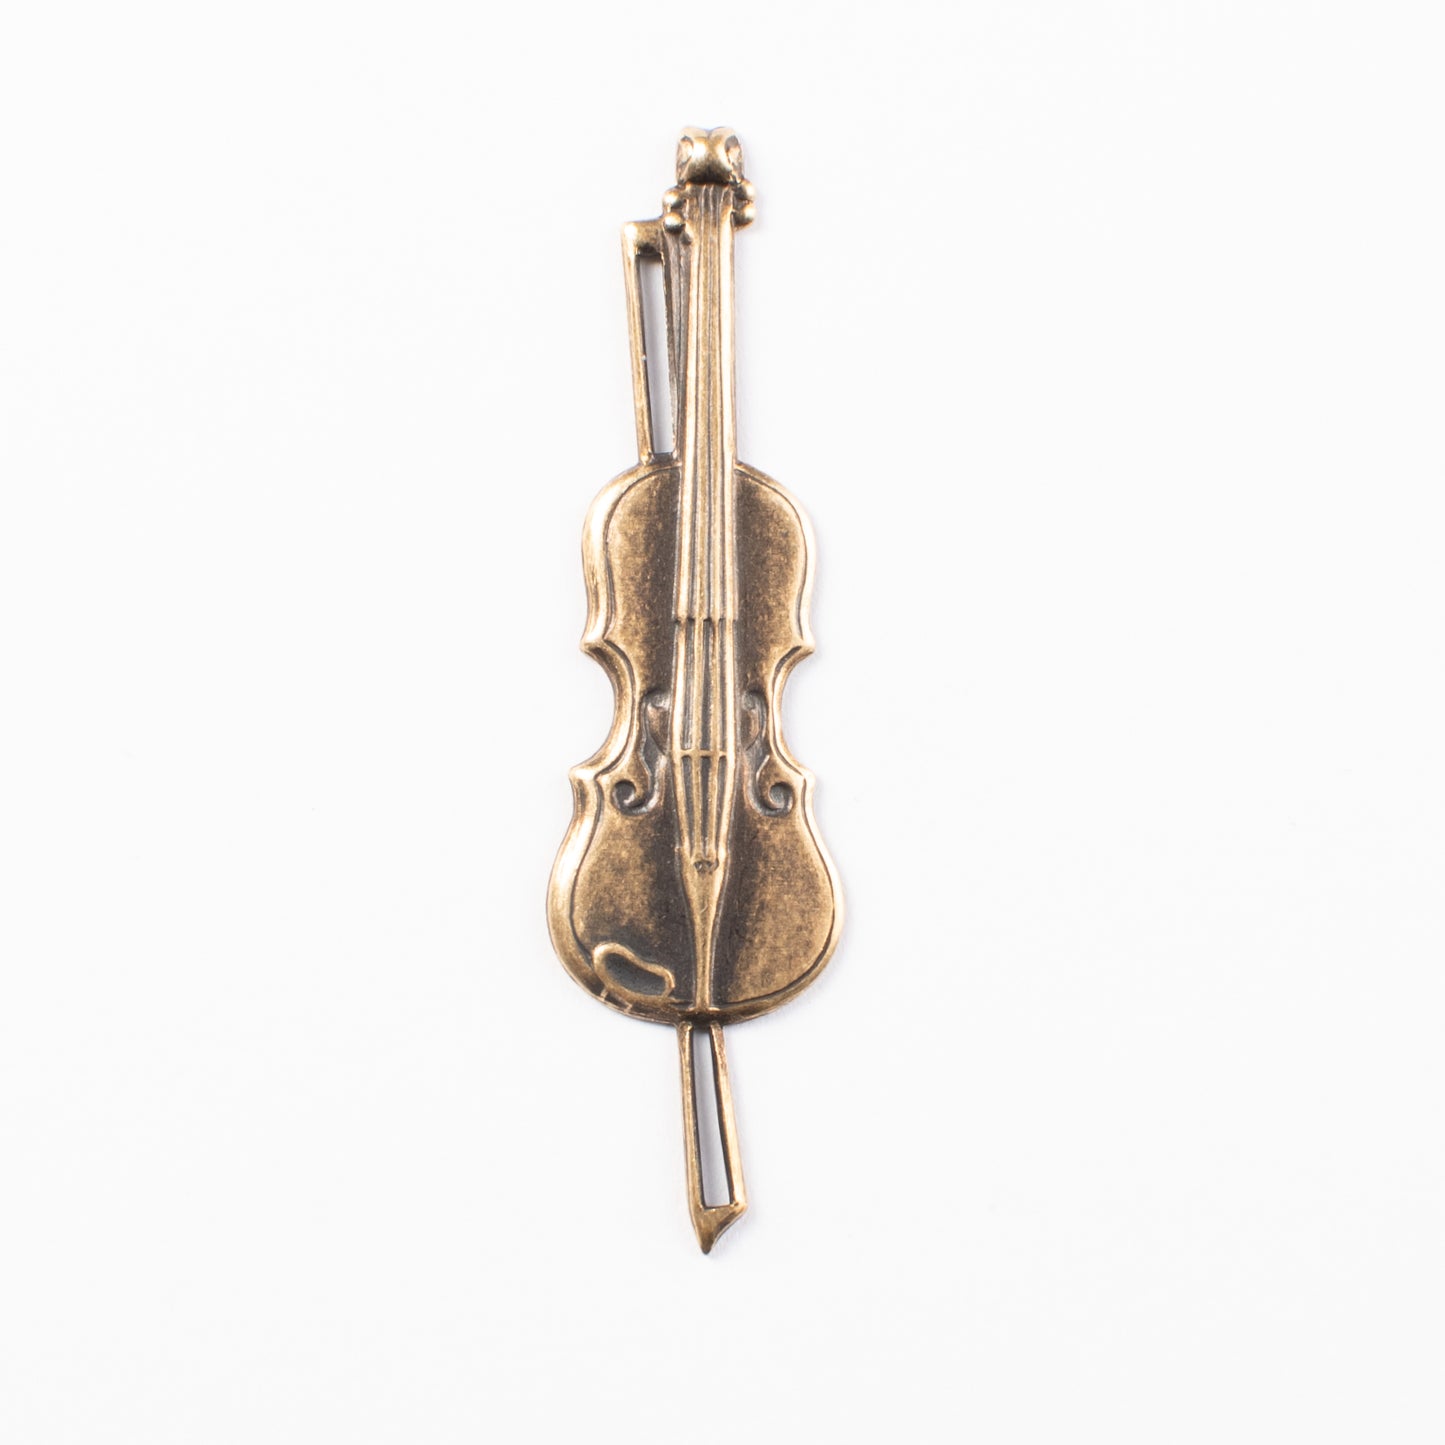 56mm Fiddle Violin Charm, Antique Gold, Antique Silver, pack of 3